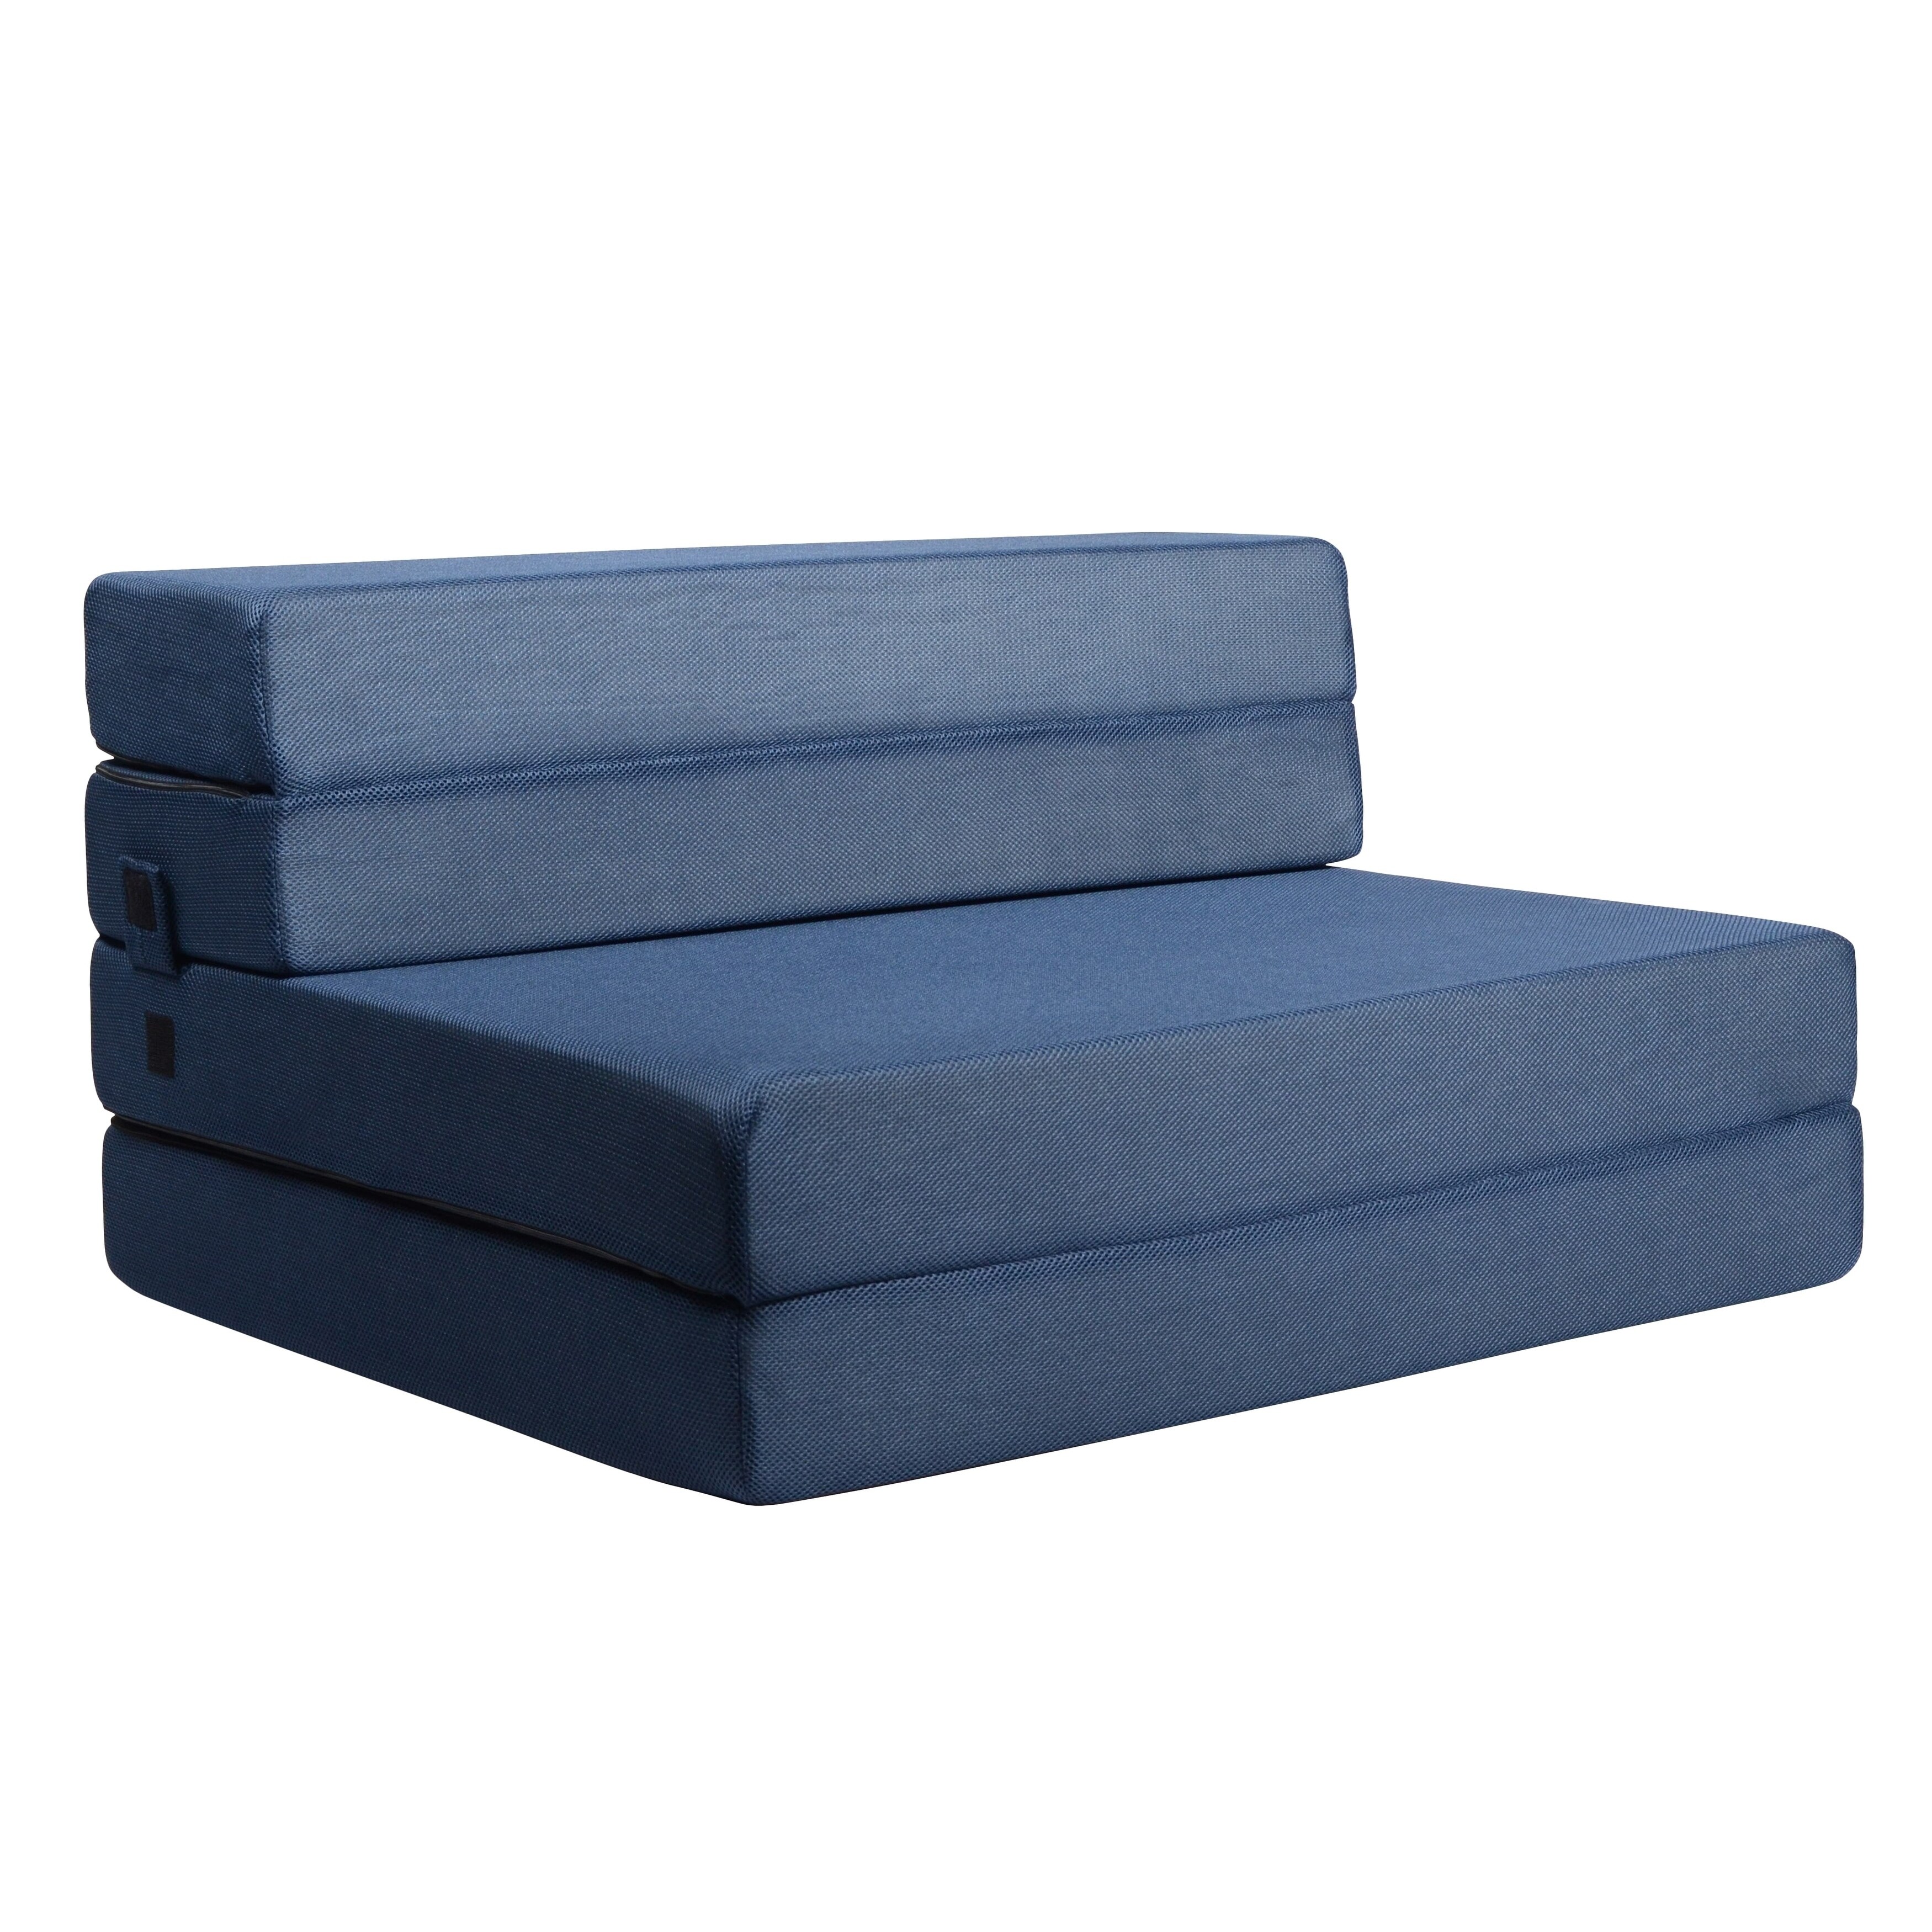 Featured image of post Fold Up Mattress Chair : Folding mattresses usually have three panels and fold in two places.